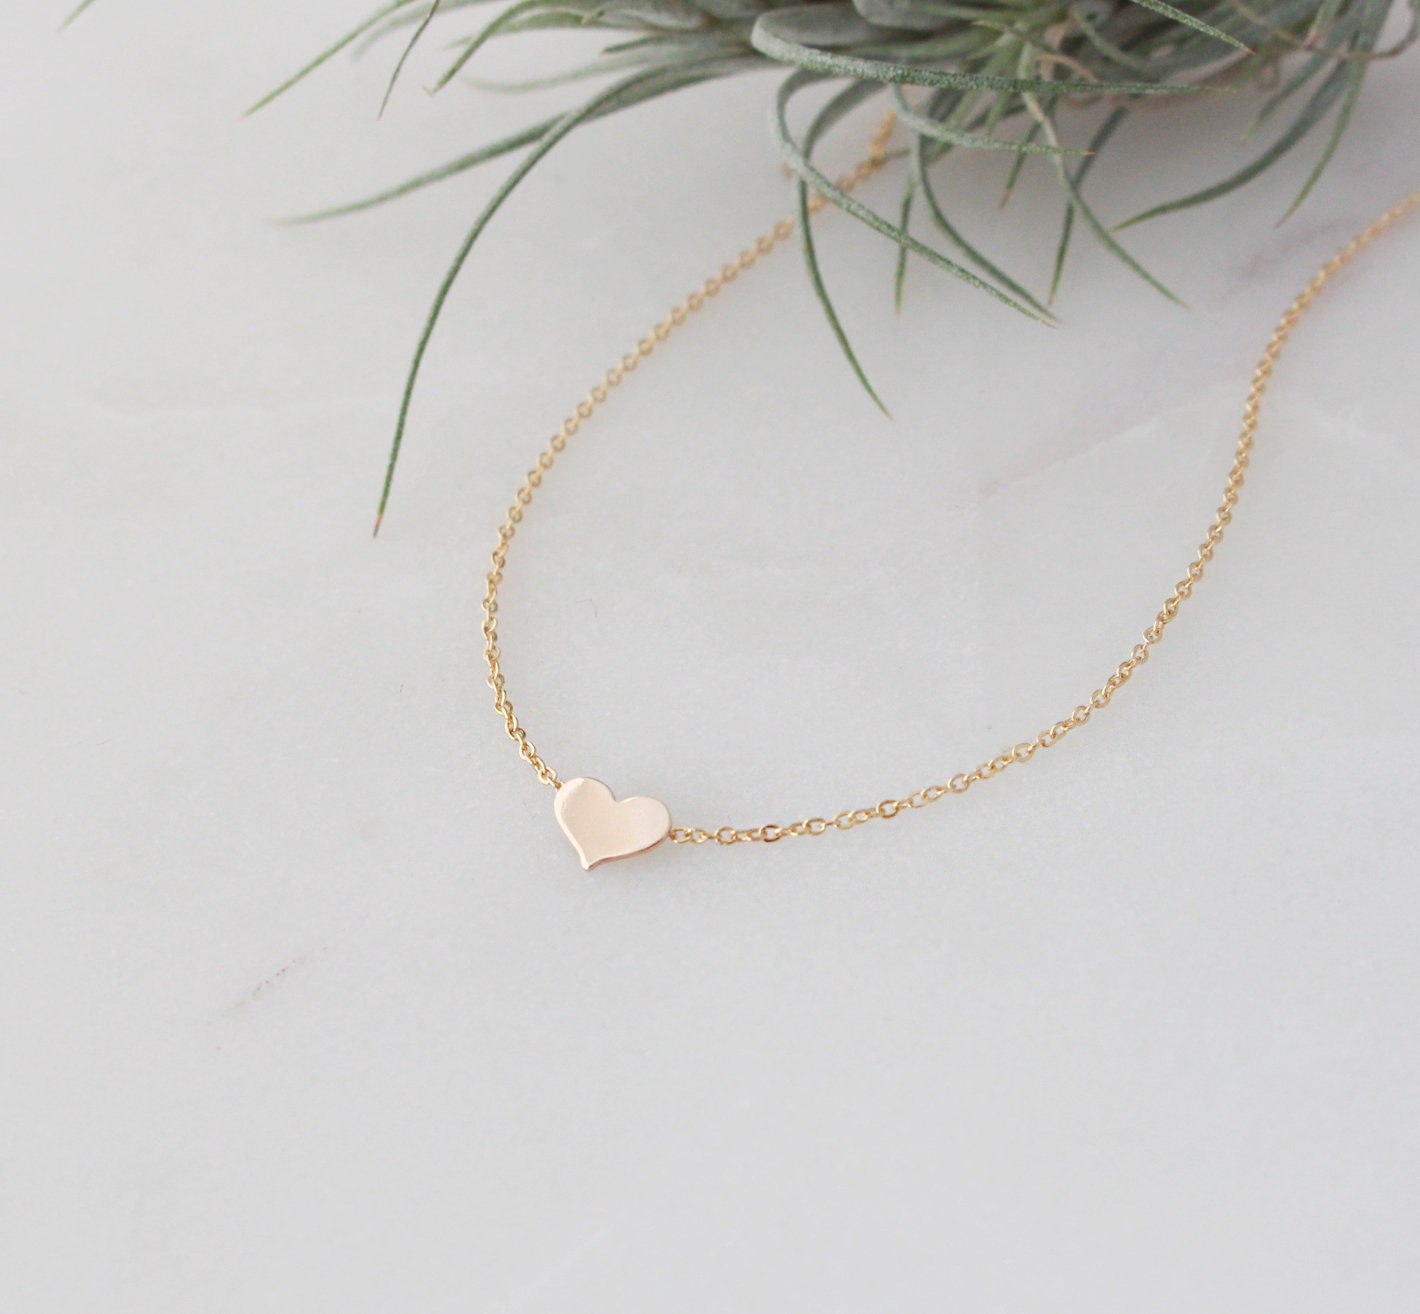 Gold Heart Charm Necklace - 7X5mm 14k Gold Filled Heart Disc